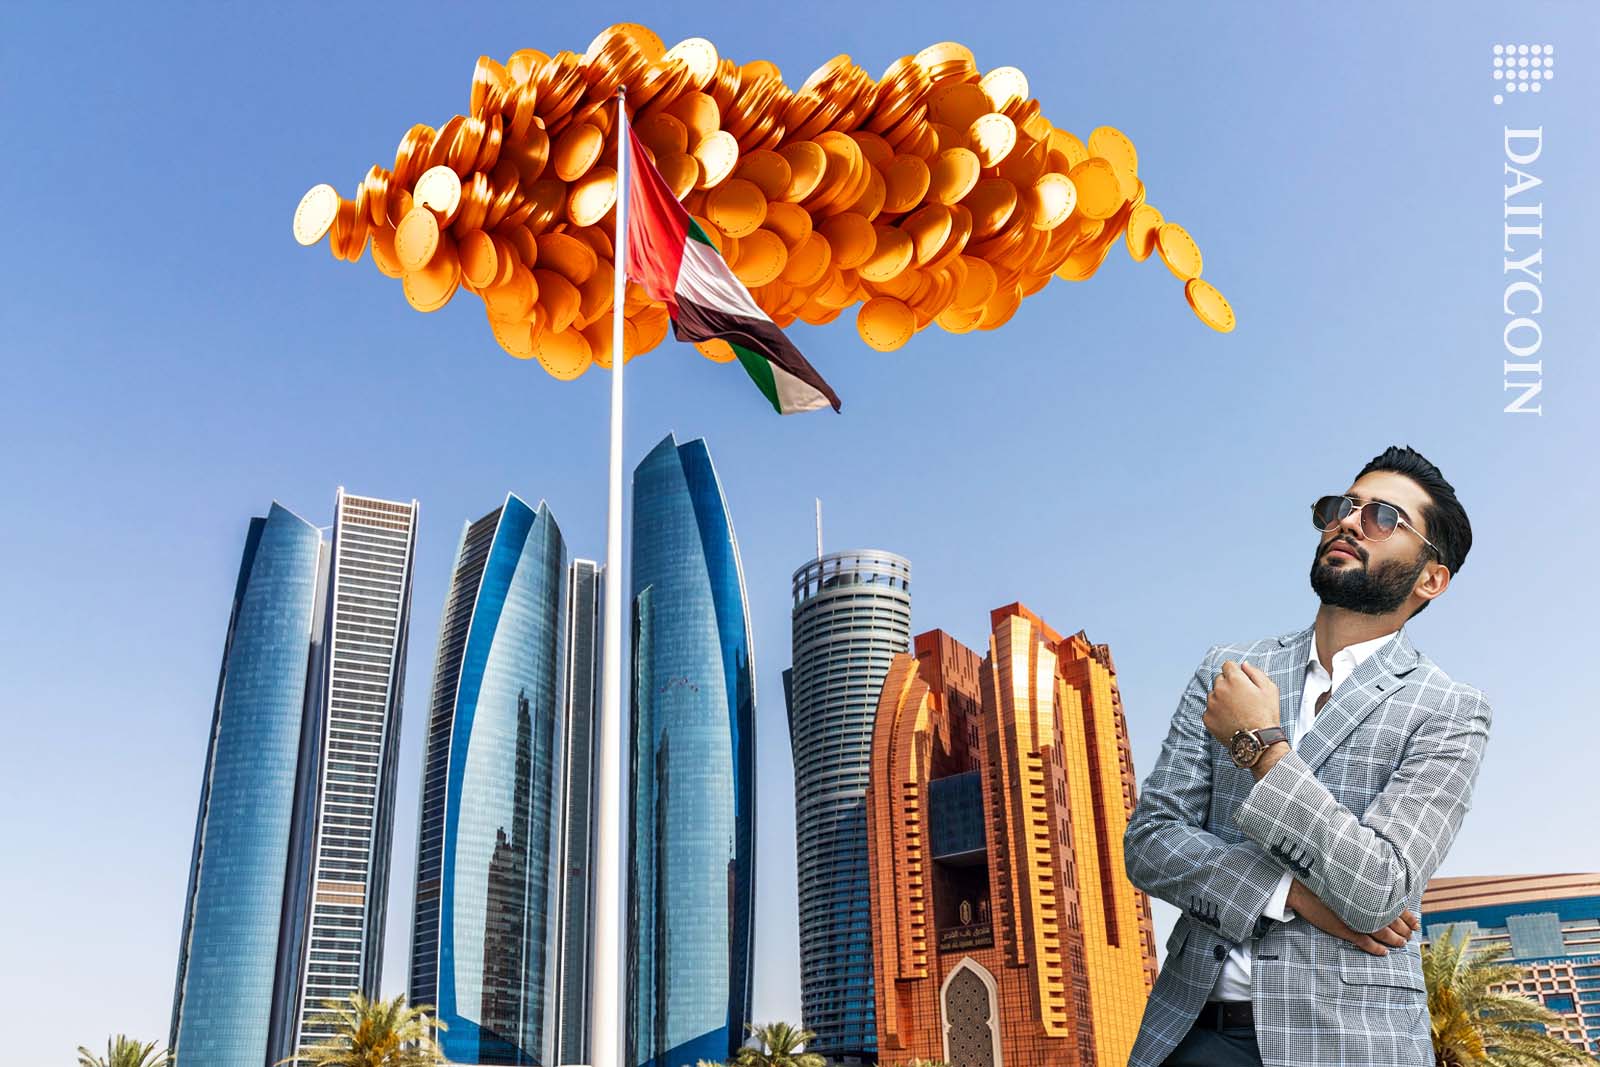 Turkish man admiring a large cloud made out of coins above a UAE city.